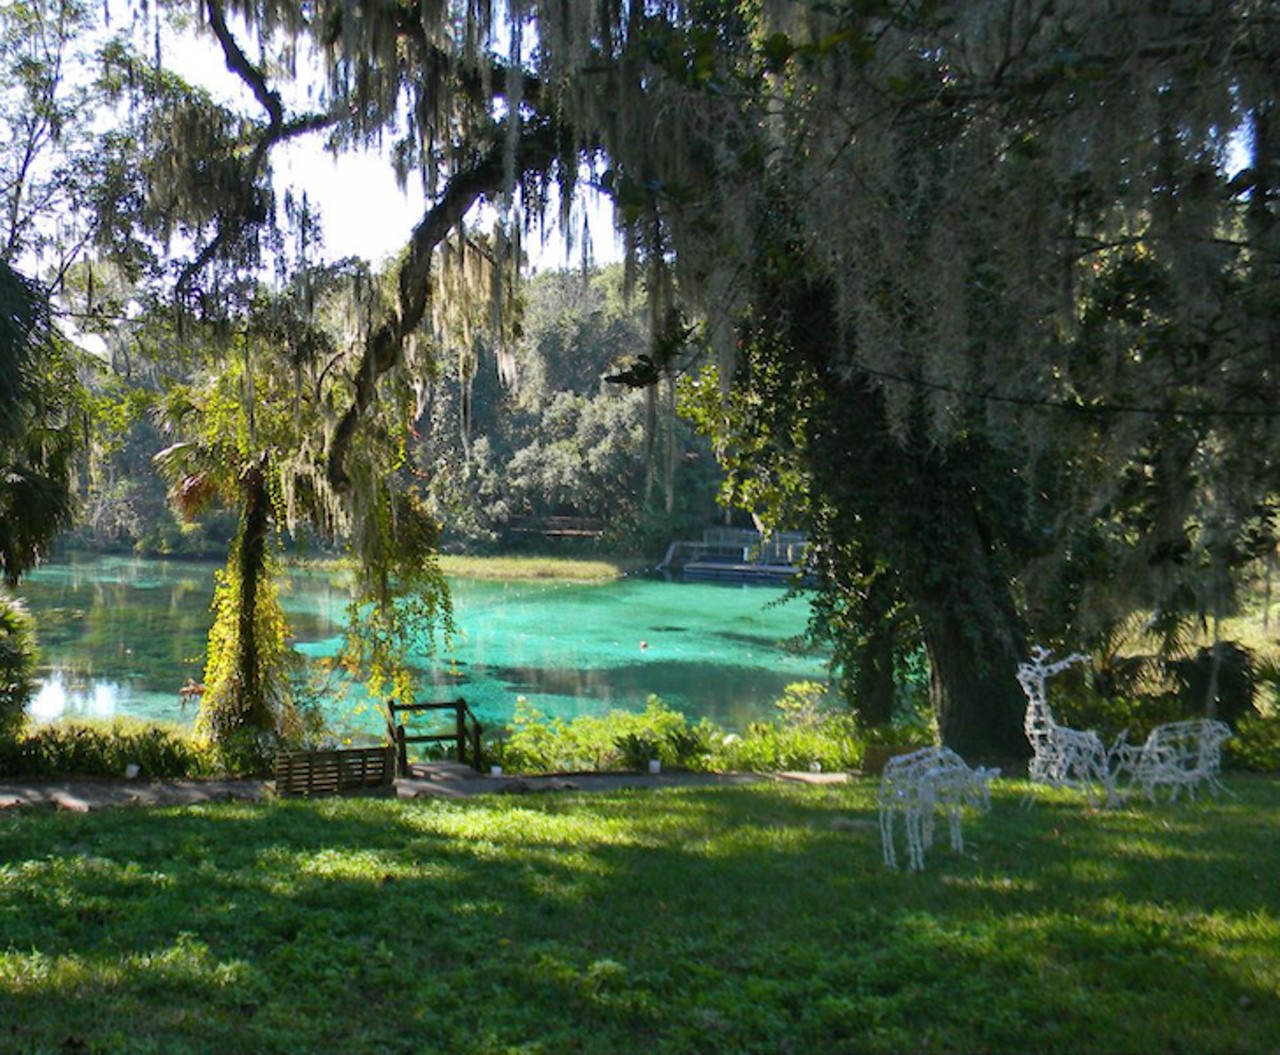 Rainbow Springs State Park  
19158 SW 81st Place Rd., Dunnellon, 352-465-8555
Distance from Orlando: 1 hour 34 minutes
The crisp cerulean water here has been in use for close to 10,000 years, according to archeological studies. You can swim, snorkel and kayak your way to leisure in this spring, which is Florida&#146;s fourth largest.
Photo via Rainbow Springs State Park/Facebook